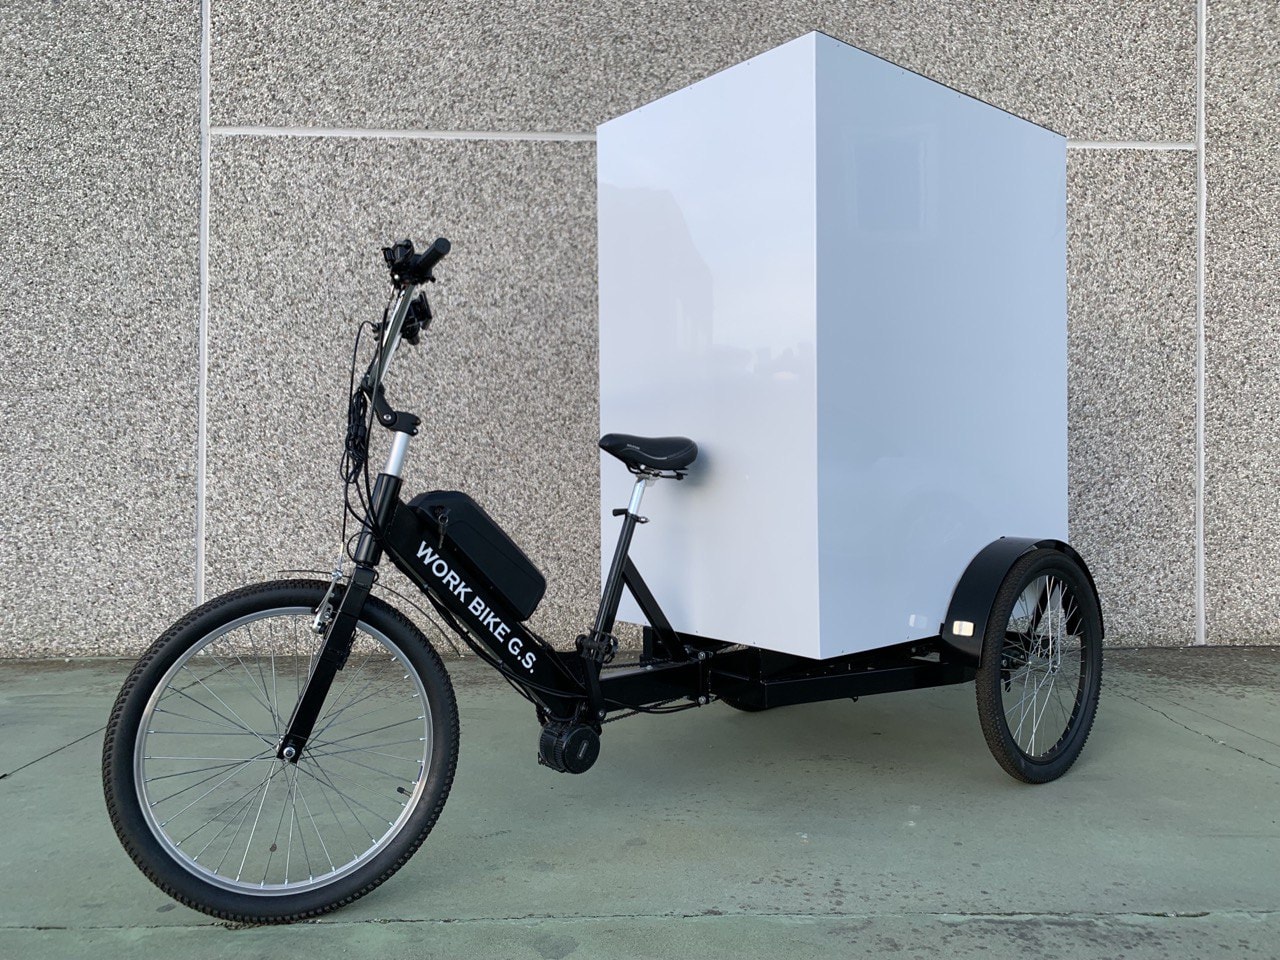 TRICICLO-CARGO-BIKE-ITALY-DELIVERY-BASIC-STREET-FOOD-1